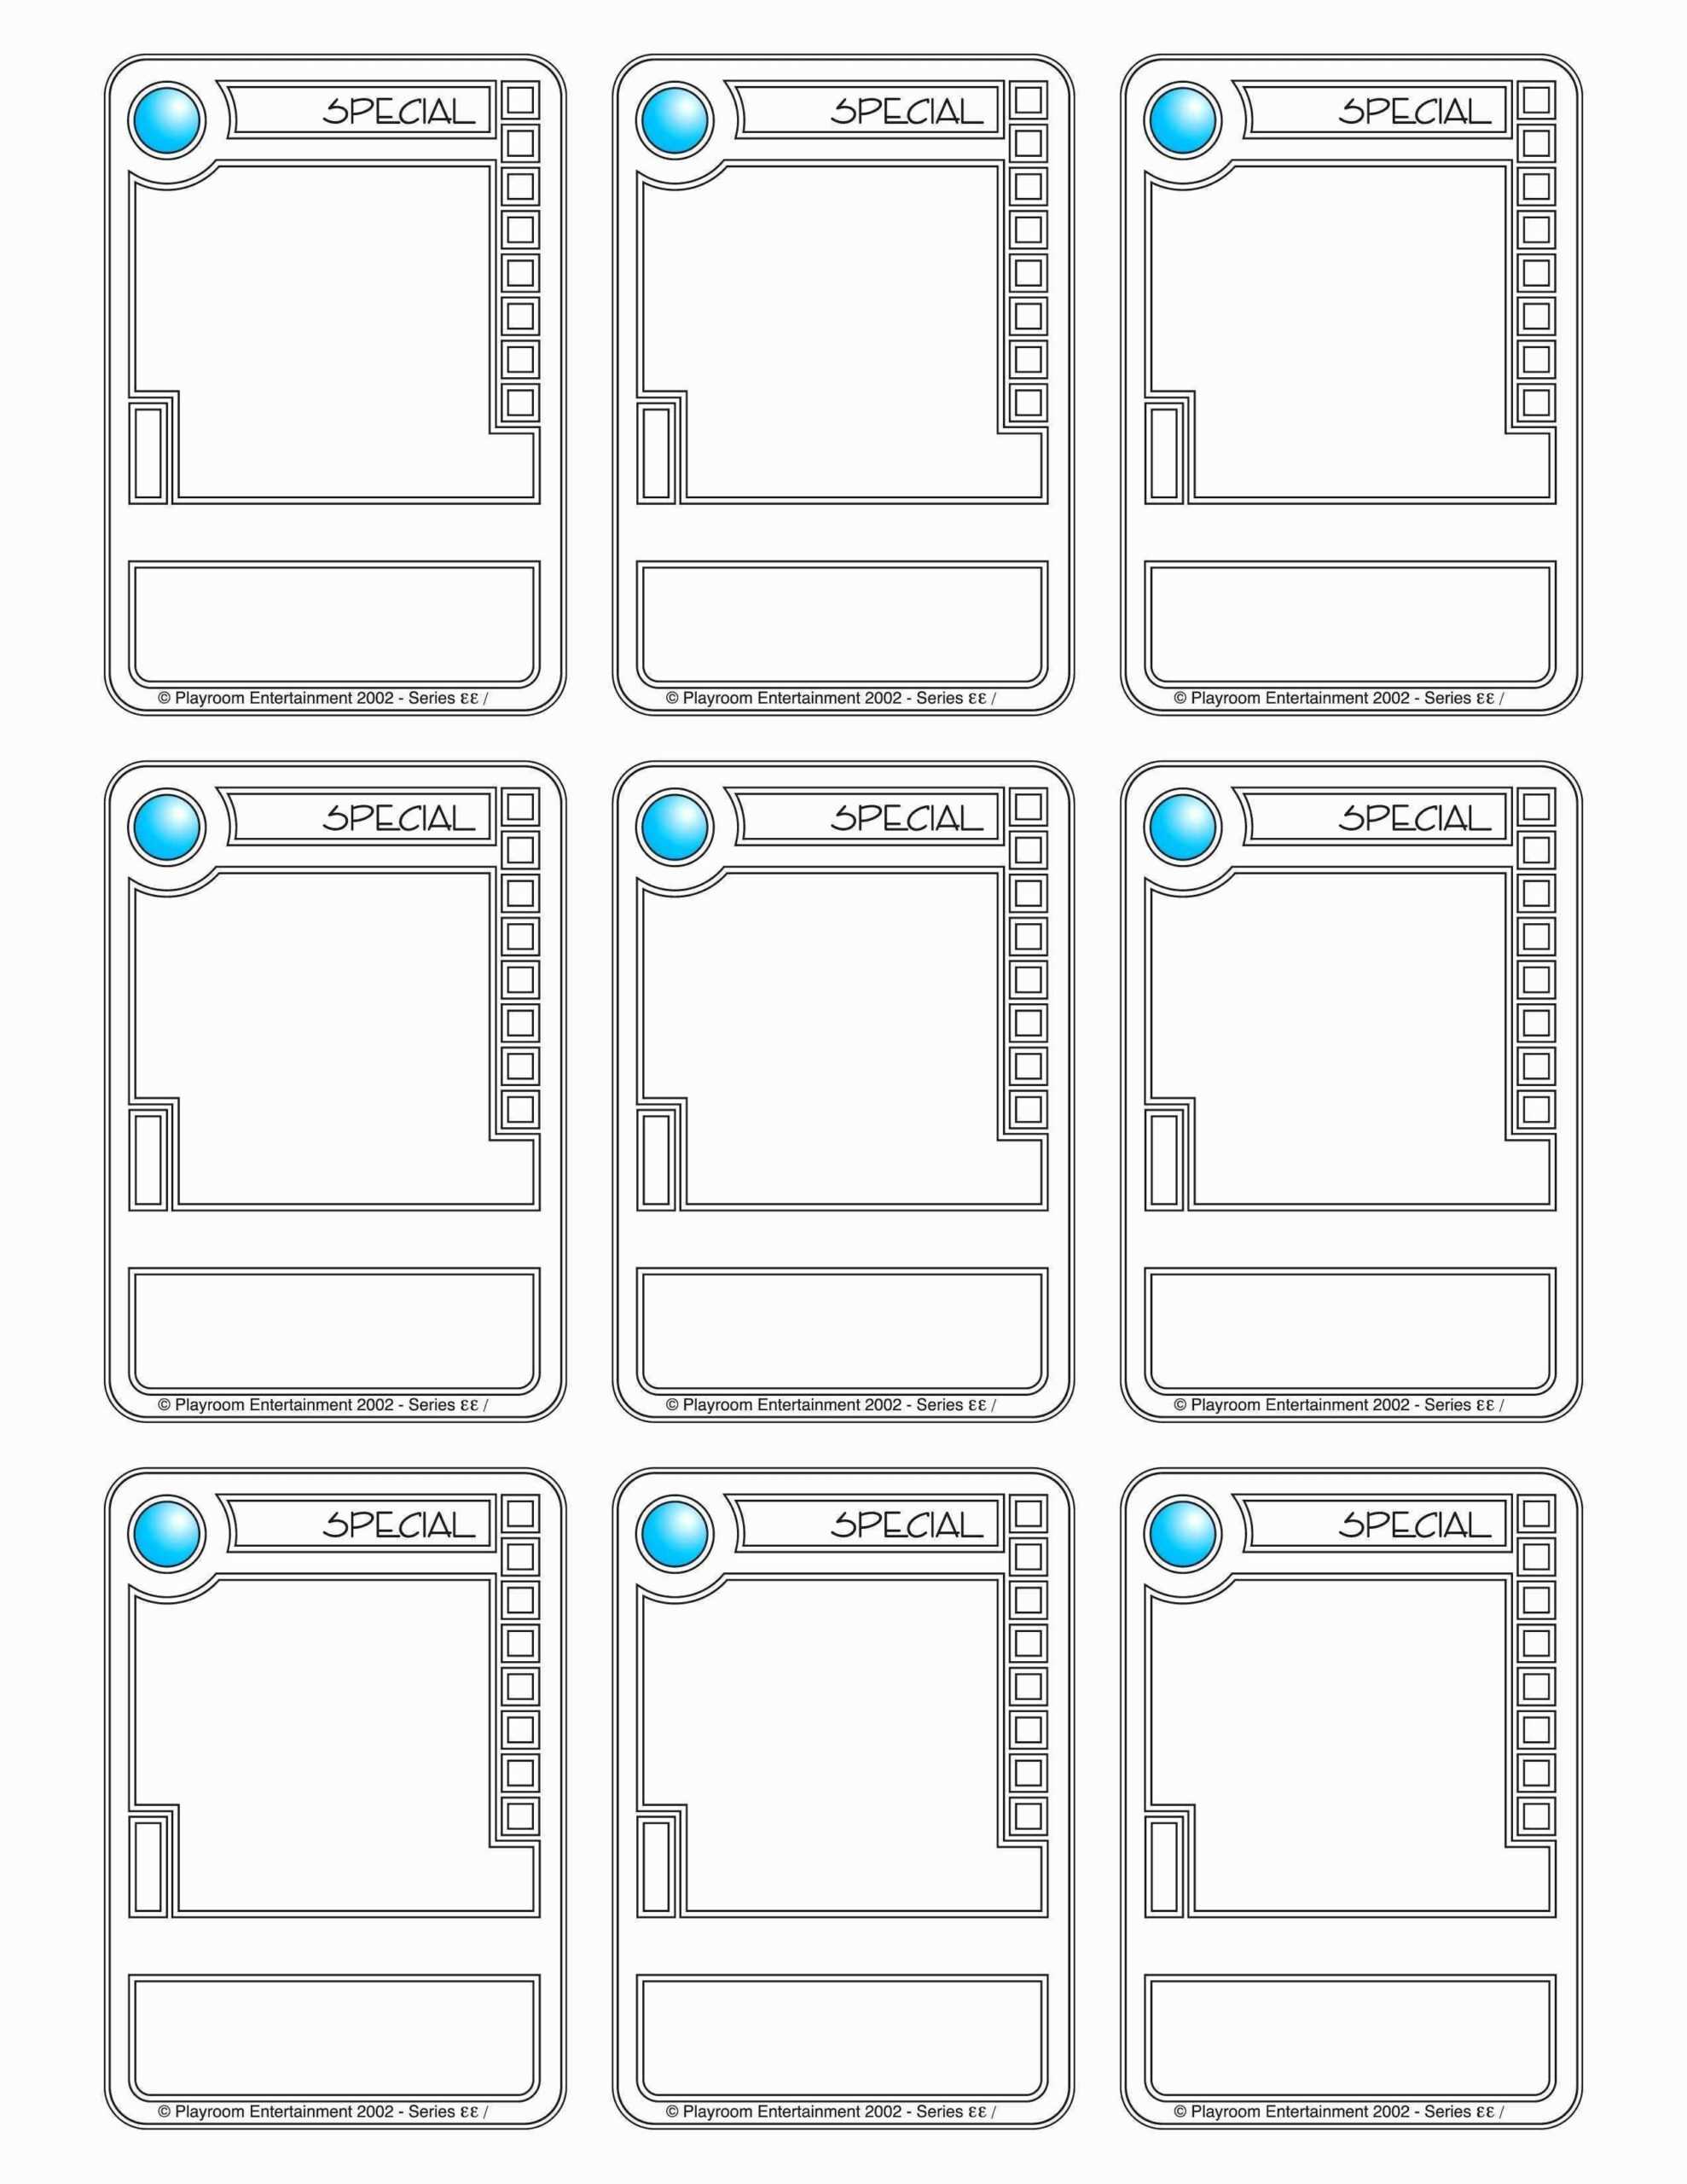 001 Trading Card Maker Free Examples Template For Success In Within Template For Game Cards